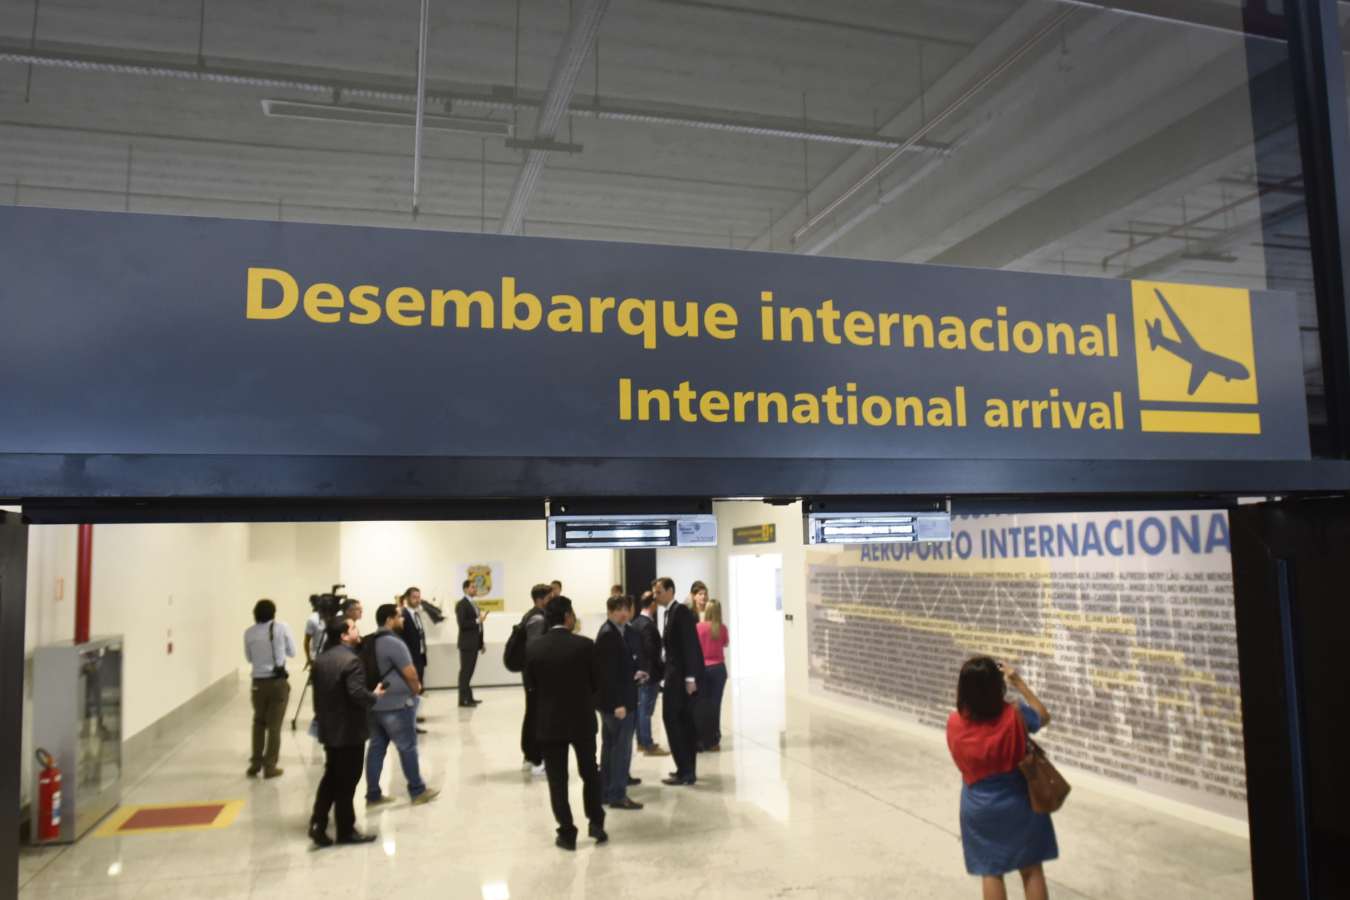 The ordinance clarifies that foreigners who are in one of Brazil's land border countries and "need to cross it in order to board a return flight to their country of residence may enter the country upon authorization from the Federal Police".